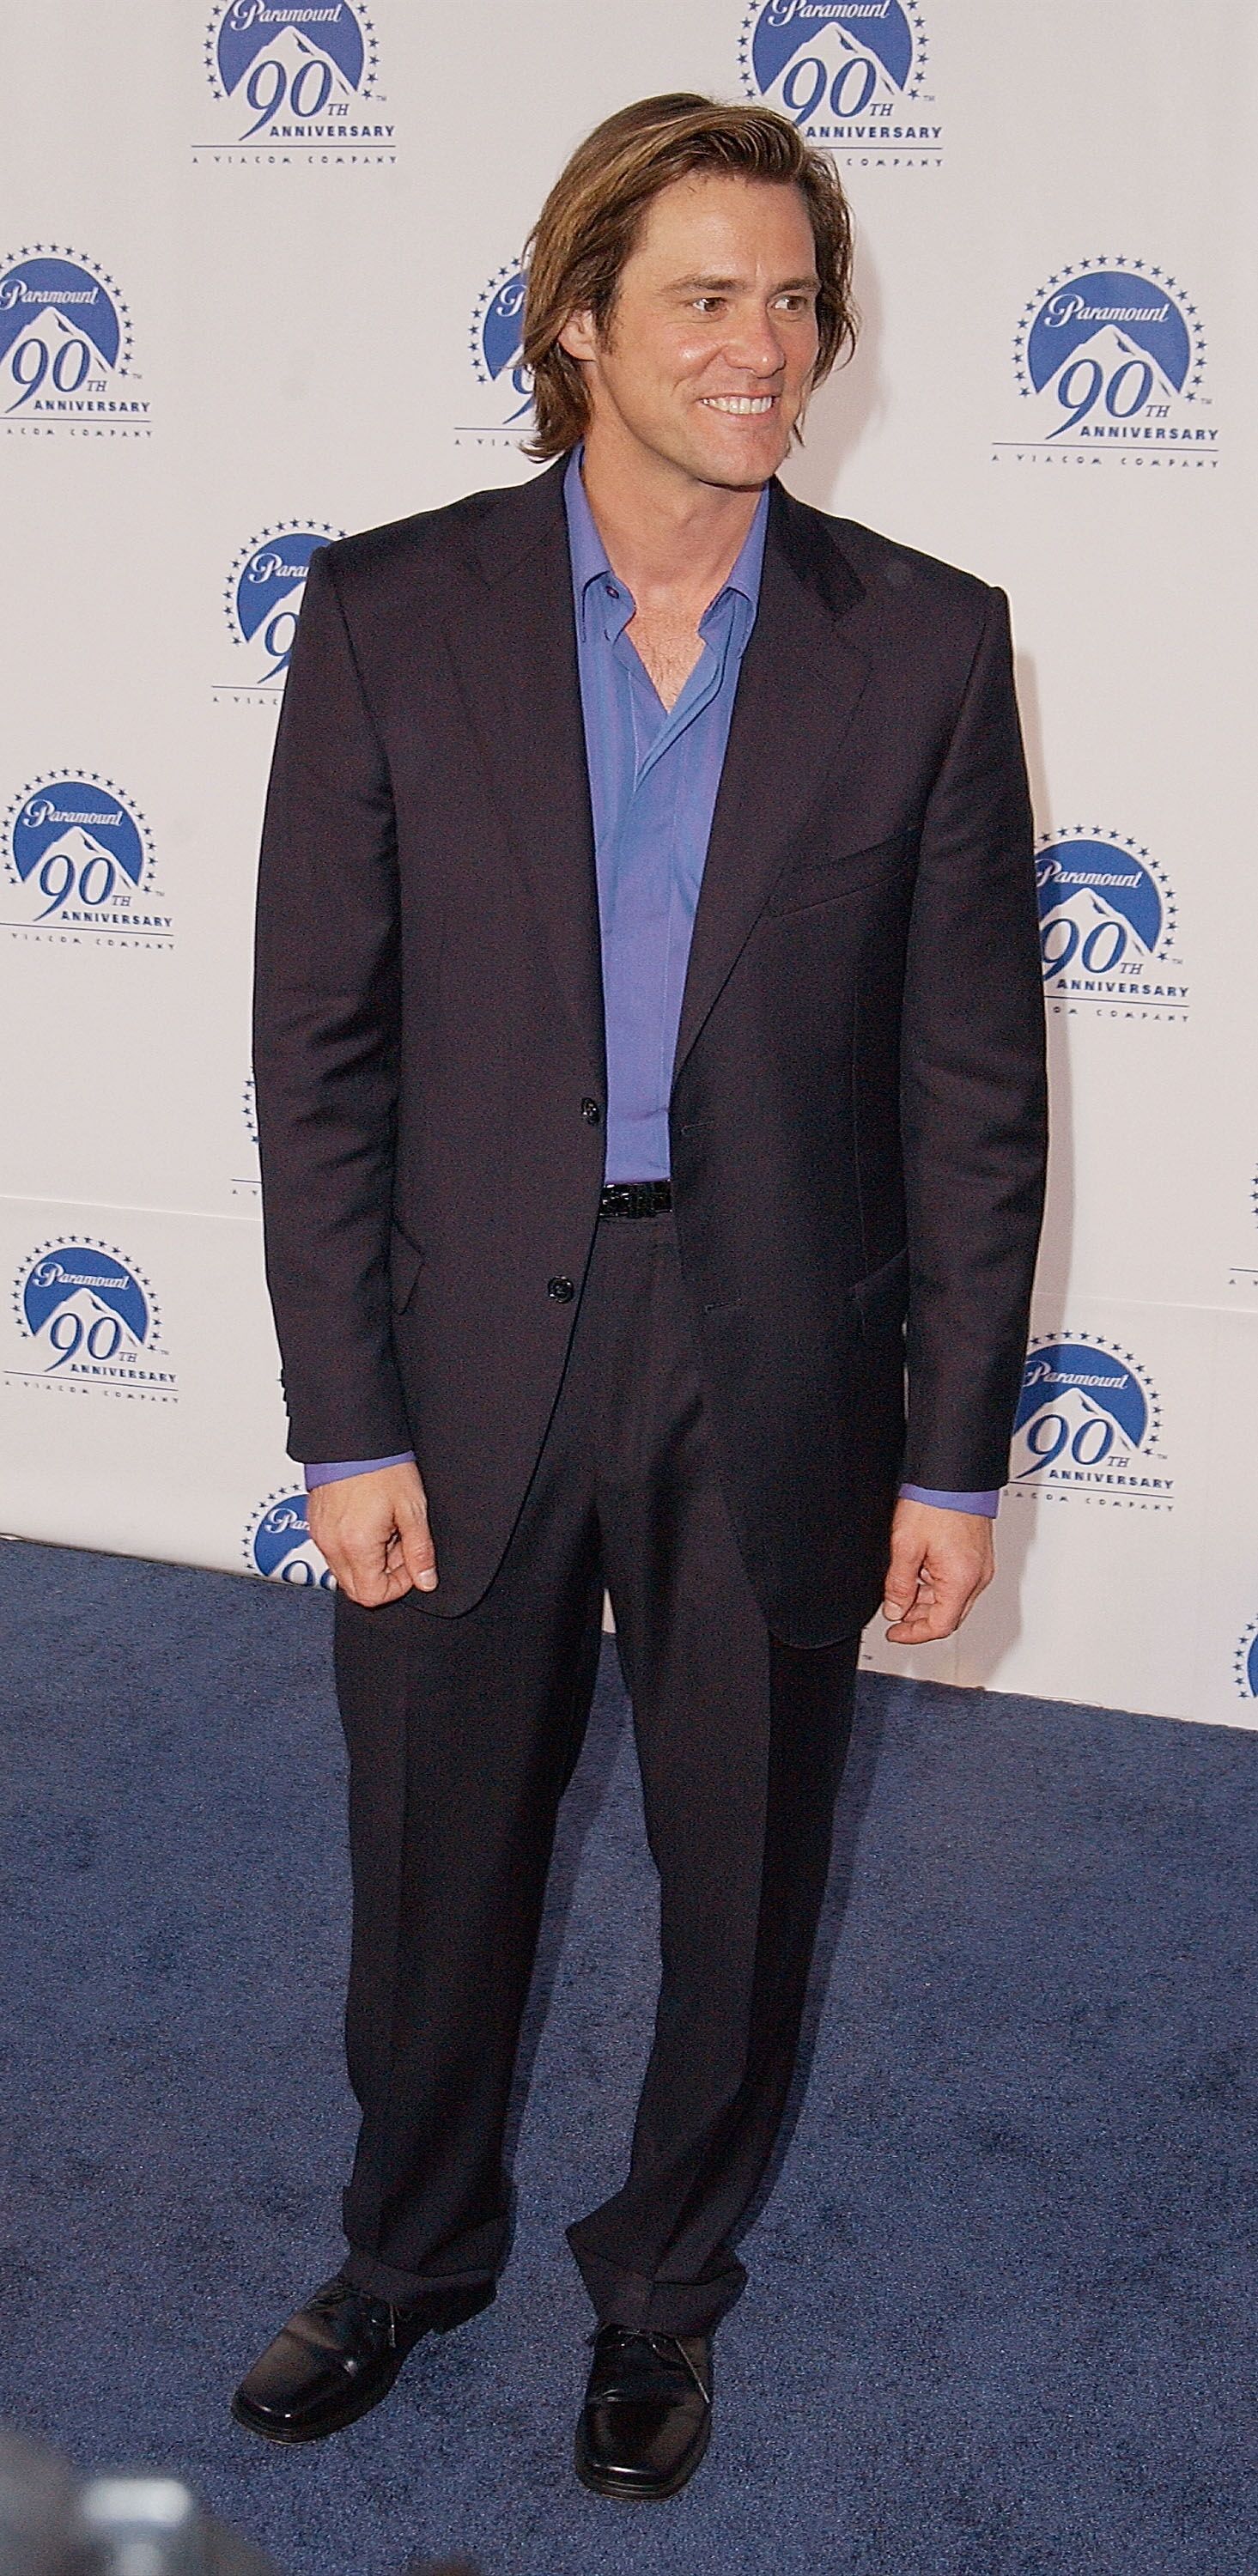 Jim Carrey attends Paramount Pictures' "90 Stars for 90 Years" Anniversary Celebration. | Source: Getty Images